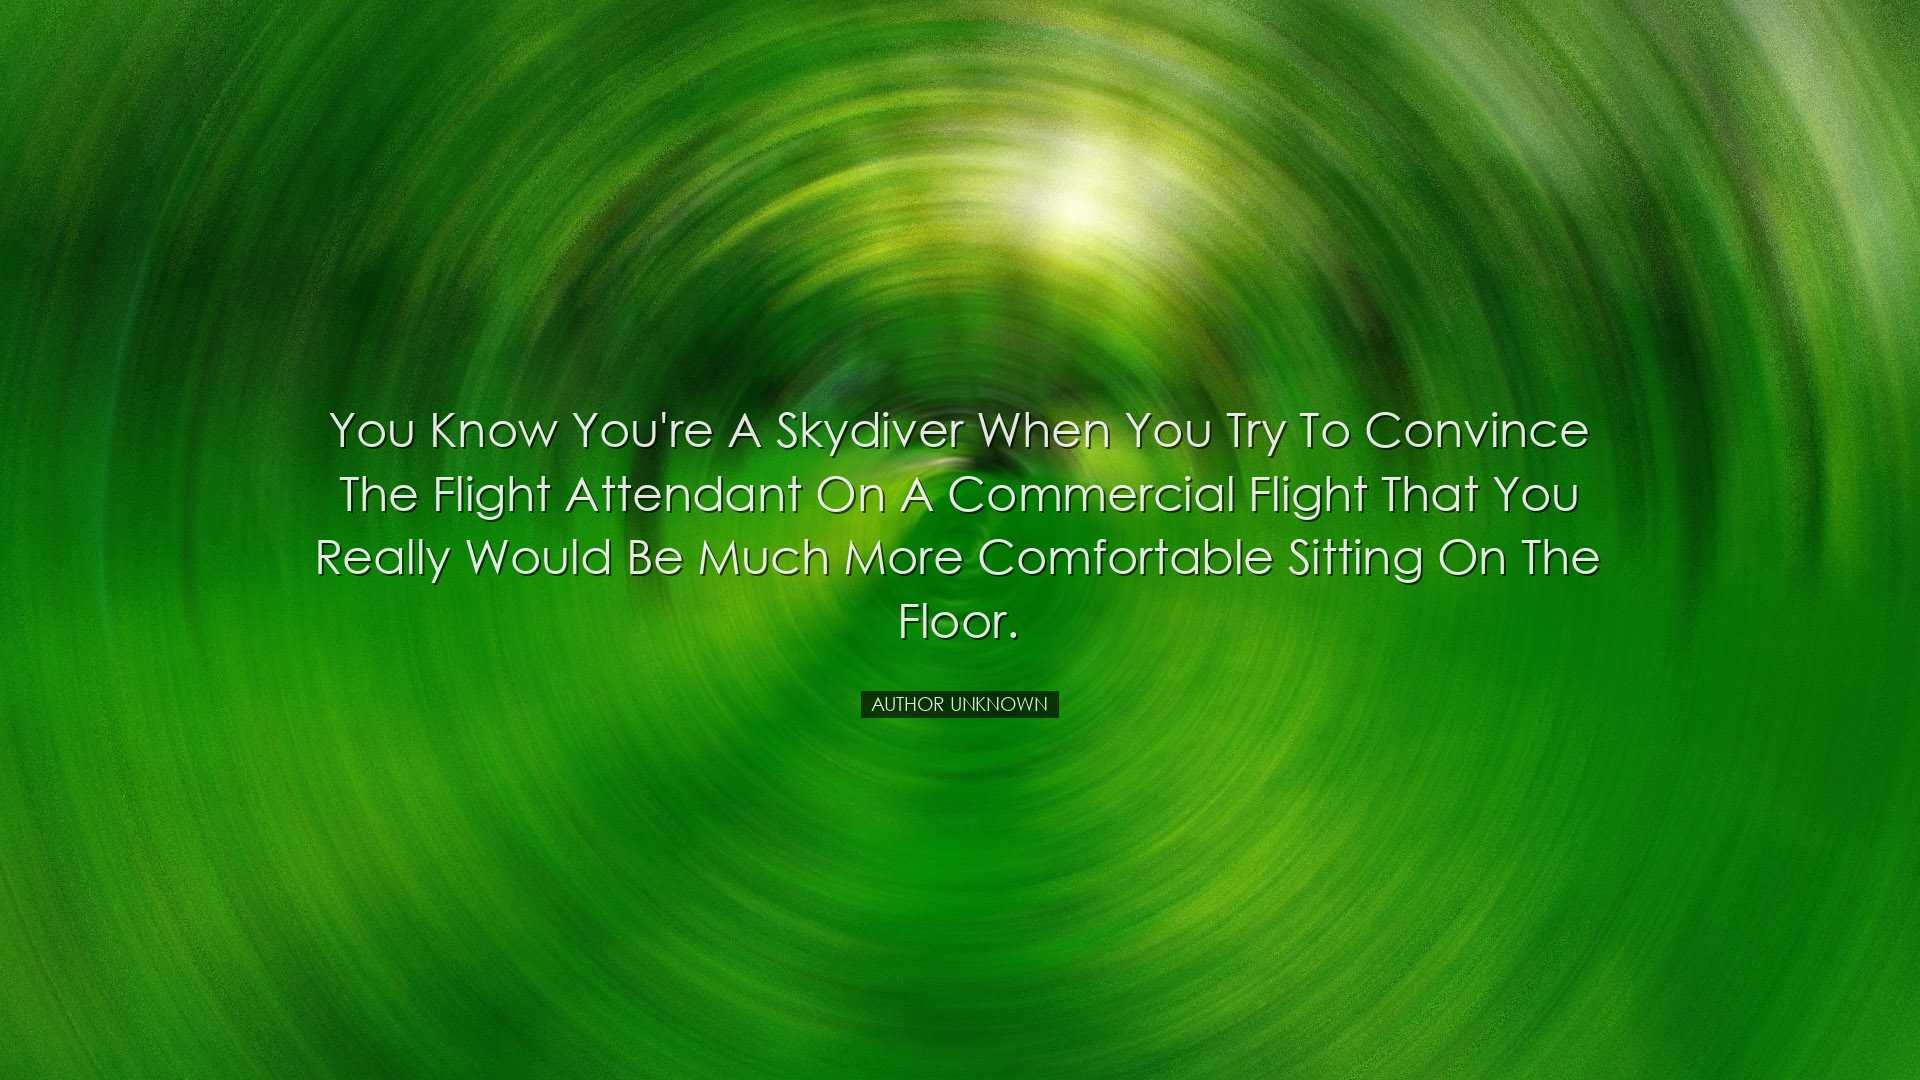 You know you're a skydiver when you try to convince the flight att